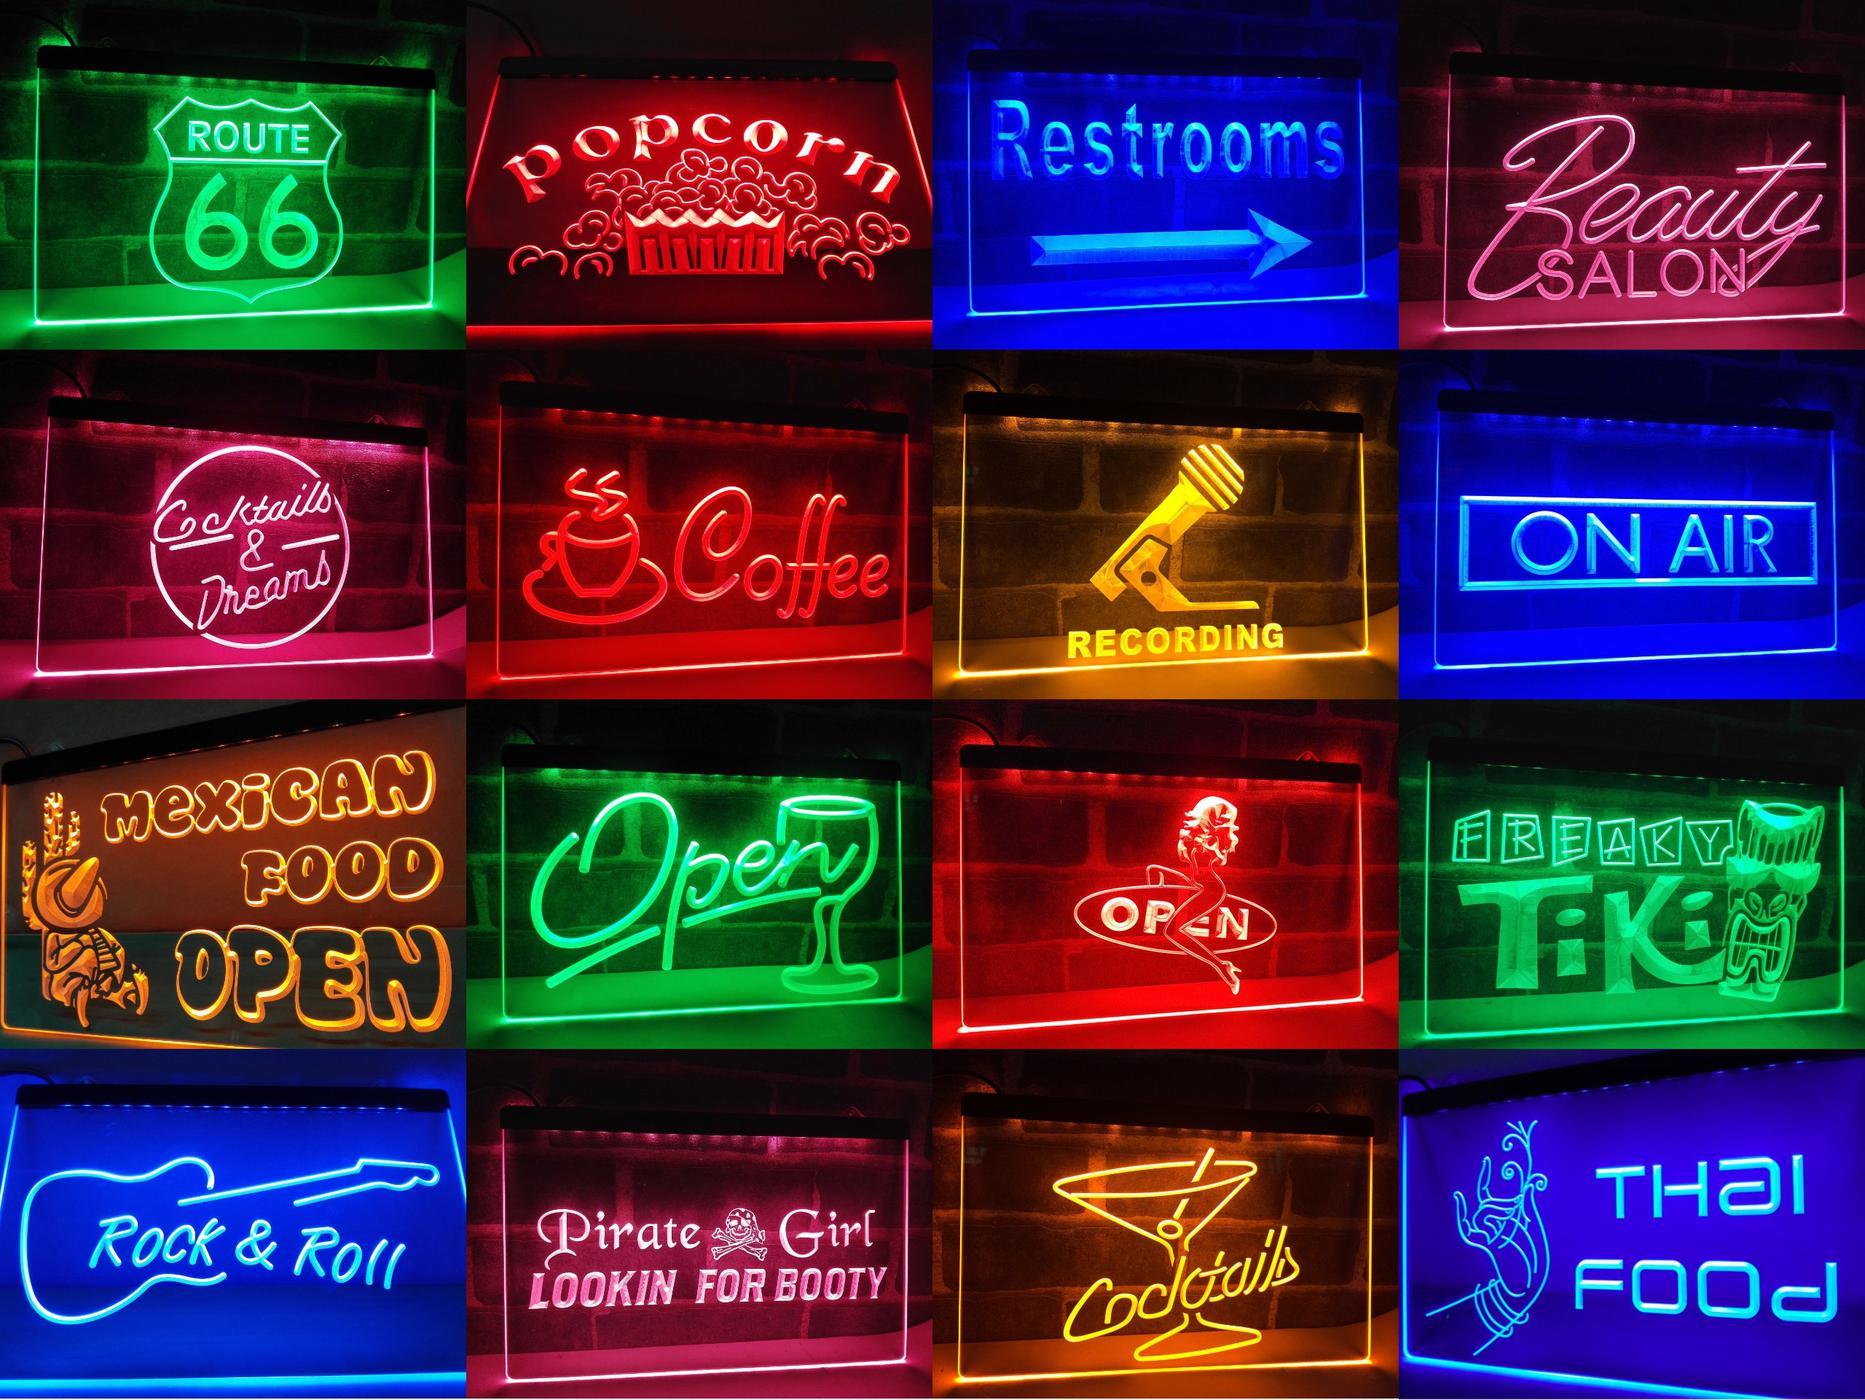 Fresh Hot Cold Deli LED Neon Light Sign - Way Up Gifts